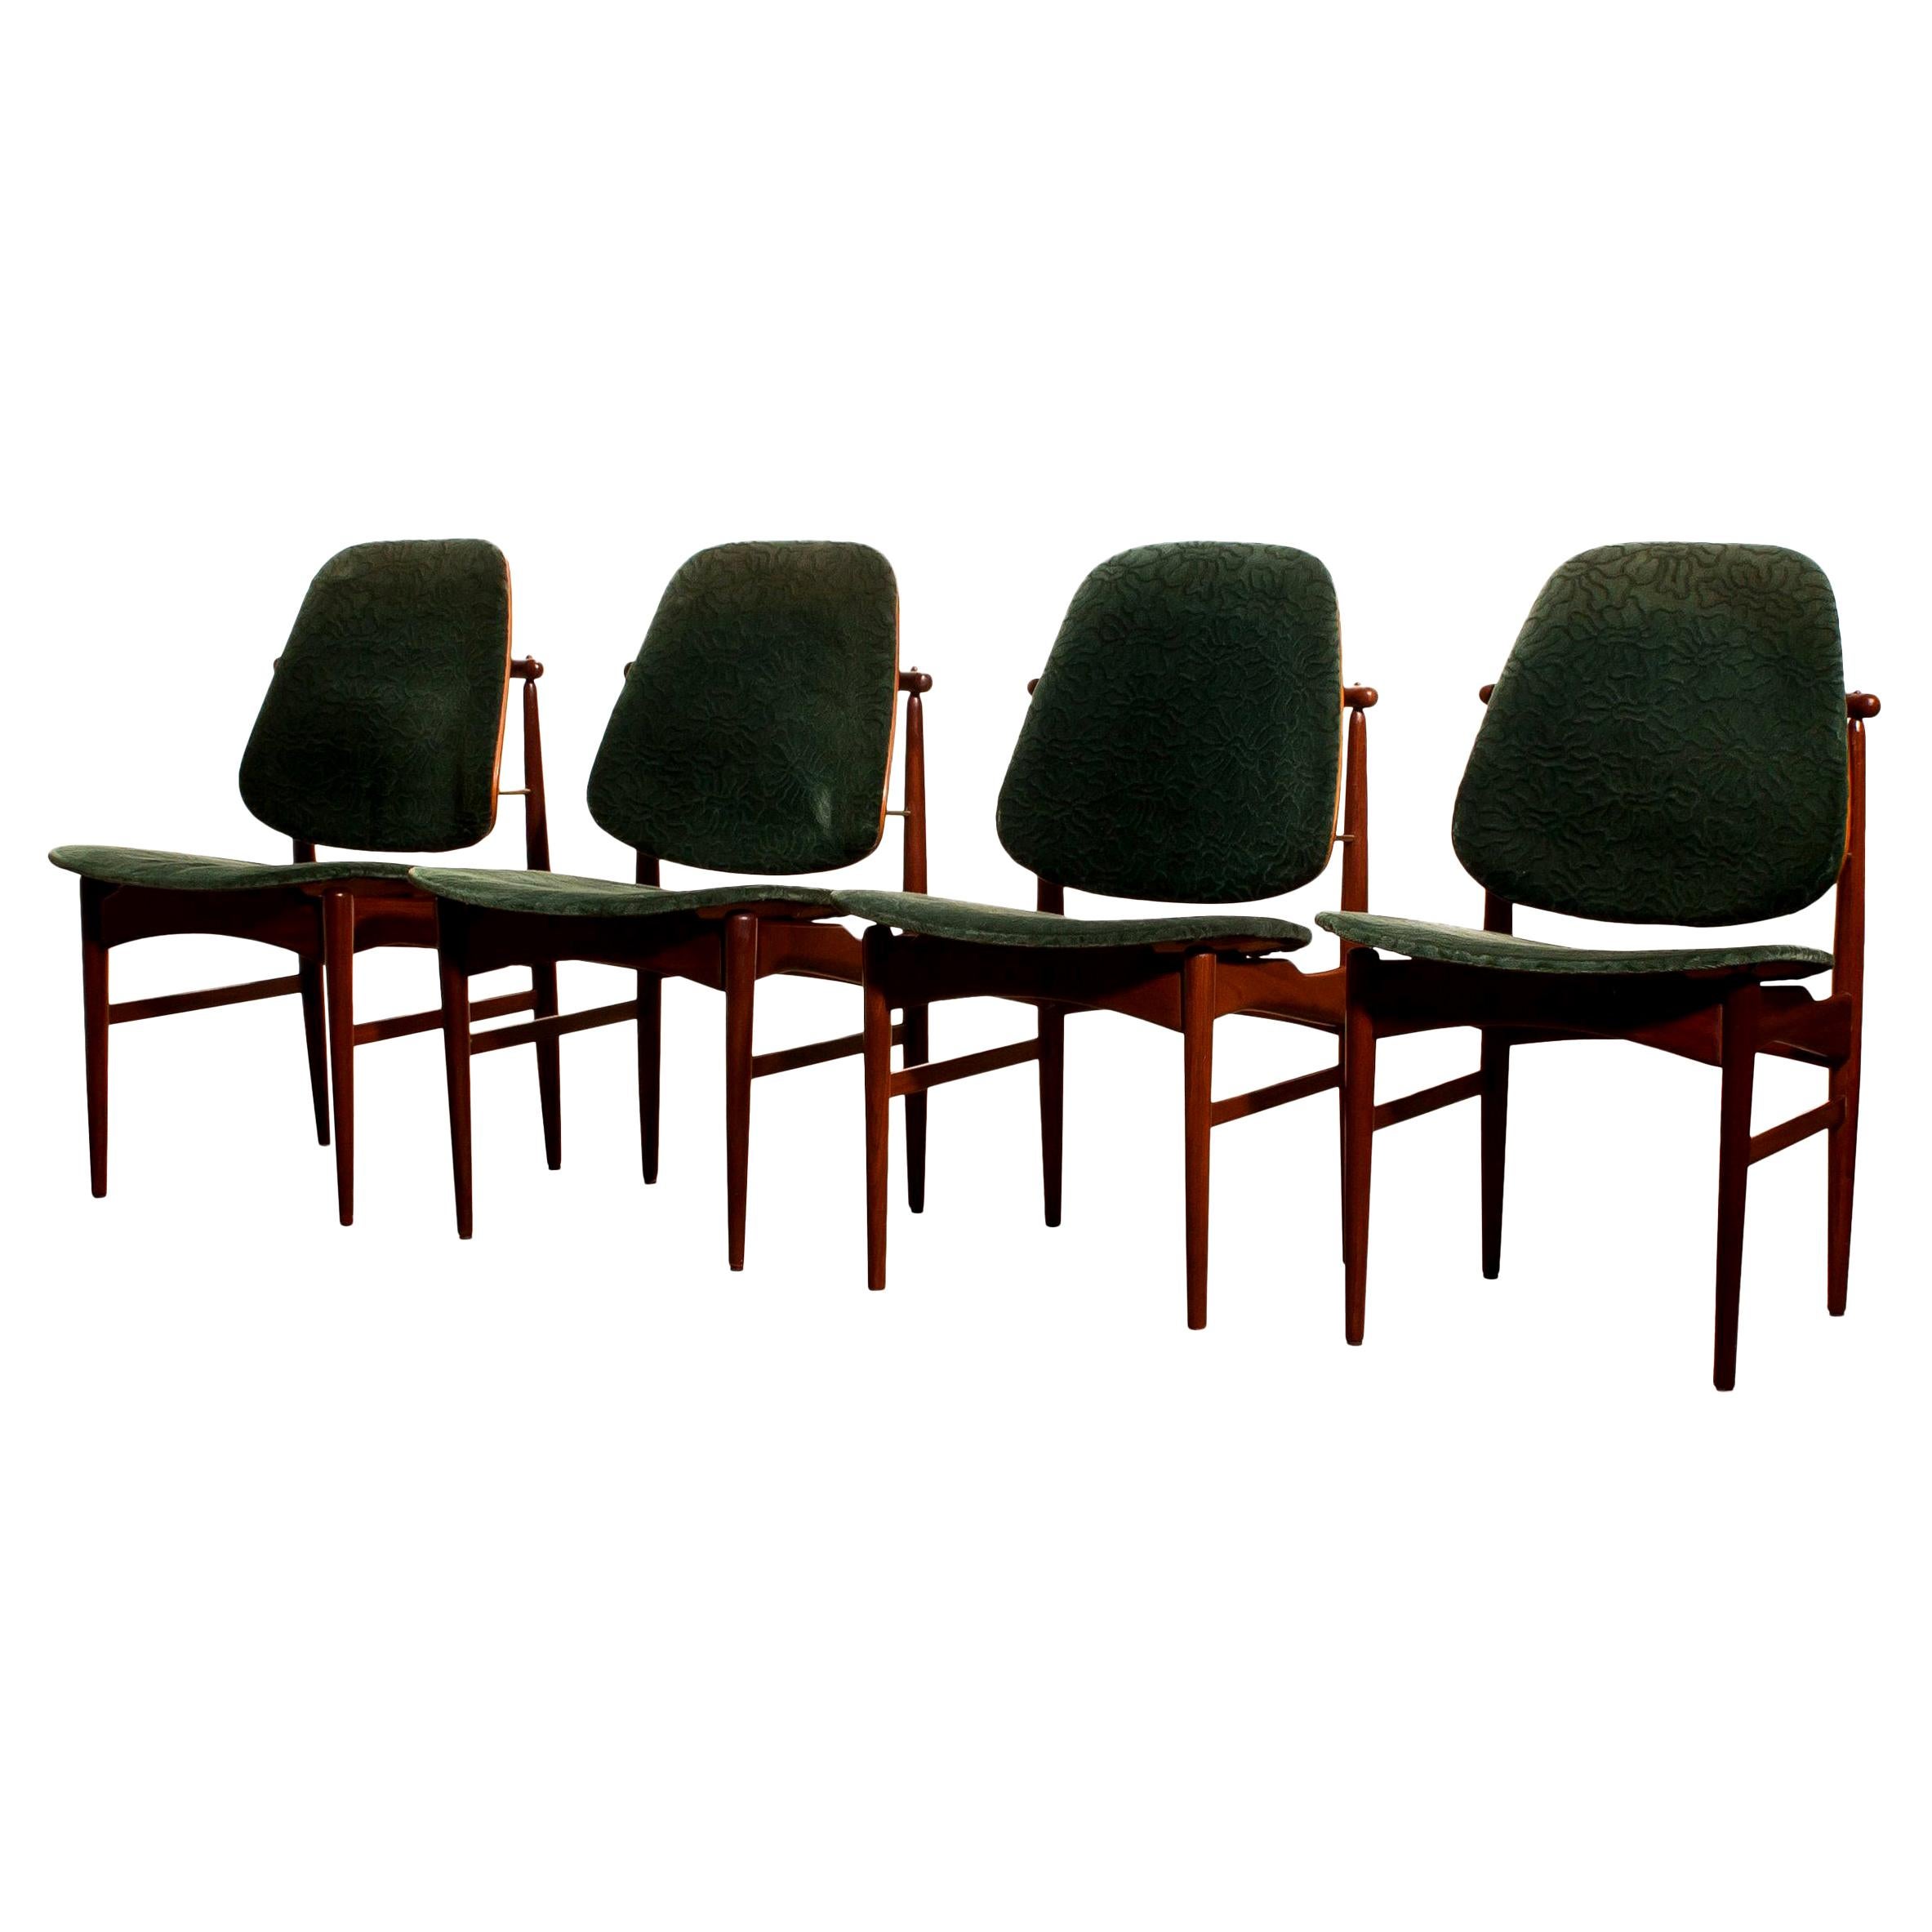 Beautiful set of four Arne Hovmand Olsen design armchairs for Hovmand-Olsen & Jutex, Denmark.
The (original) fabric needs to be replaced!
These chairs sit extremely comfortable and are beautifully finished with beautiful bronze details.
The teak